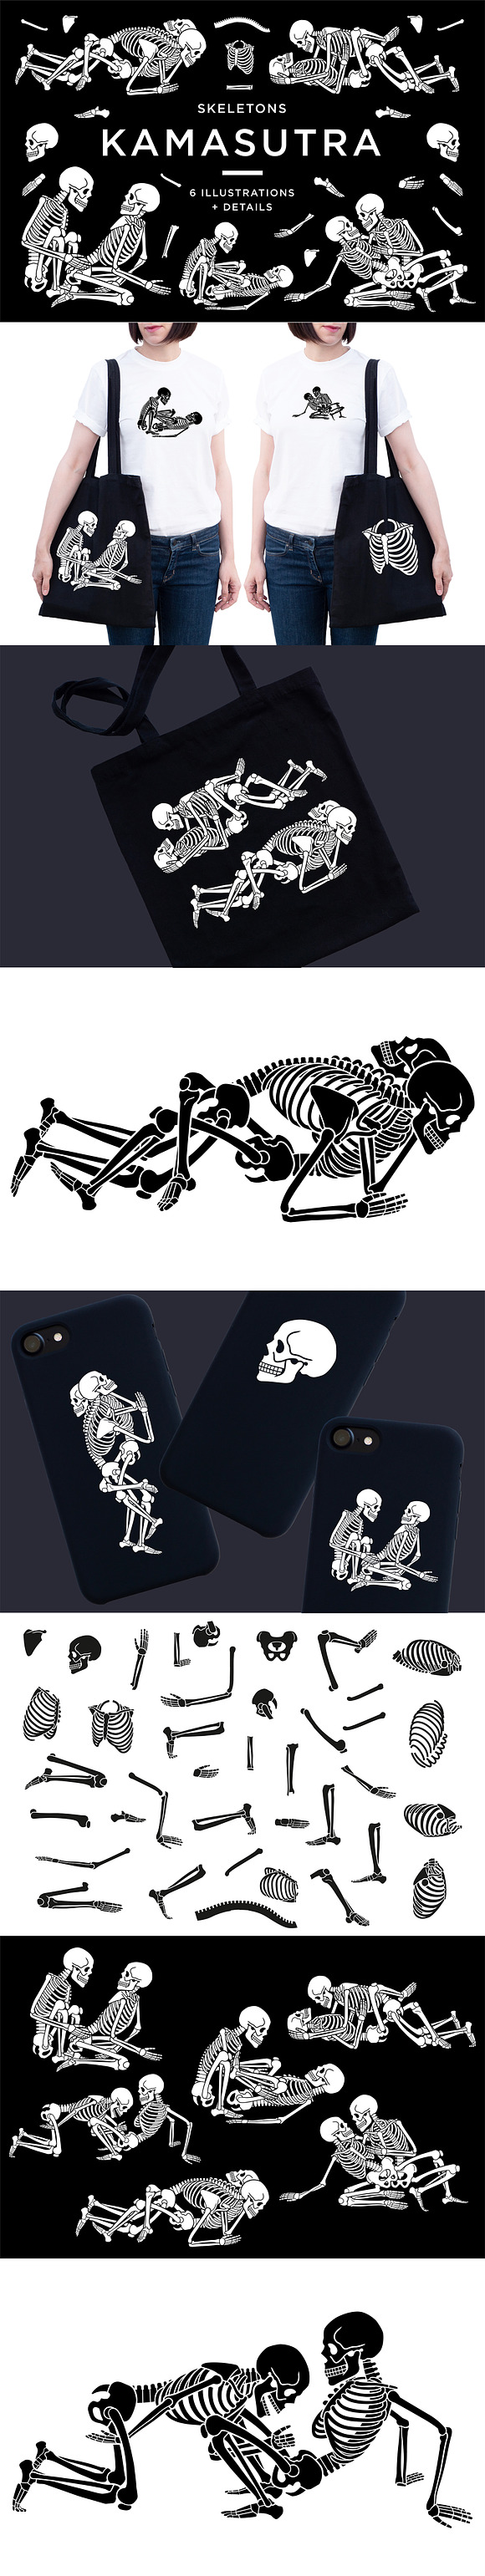 KAMASUTRA with skeletons in Illustrations - product preview 13